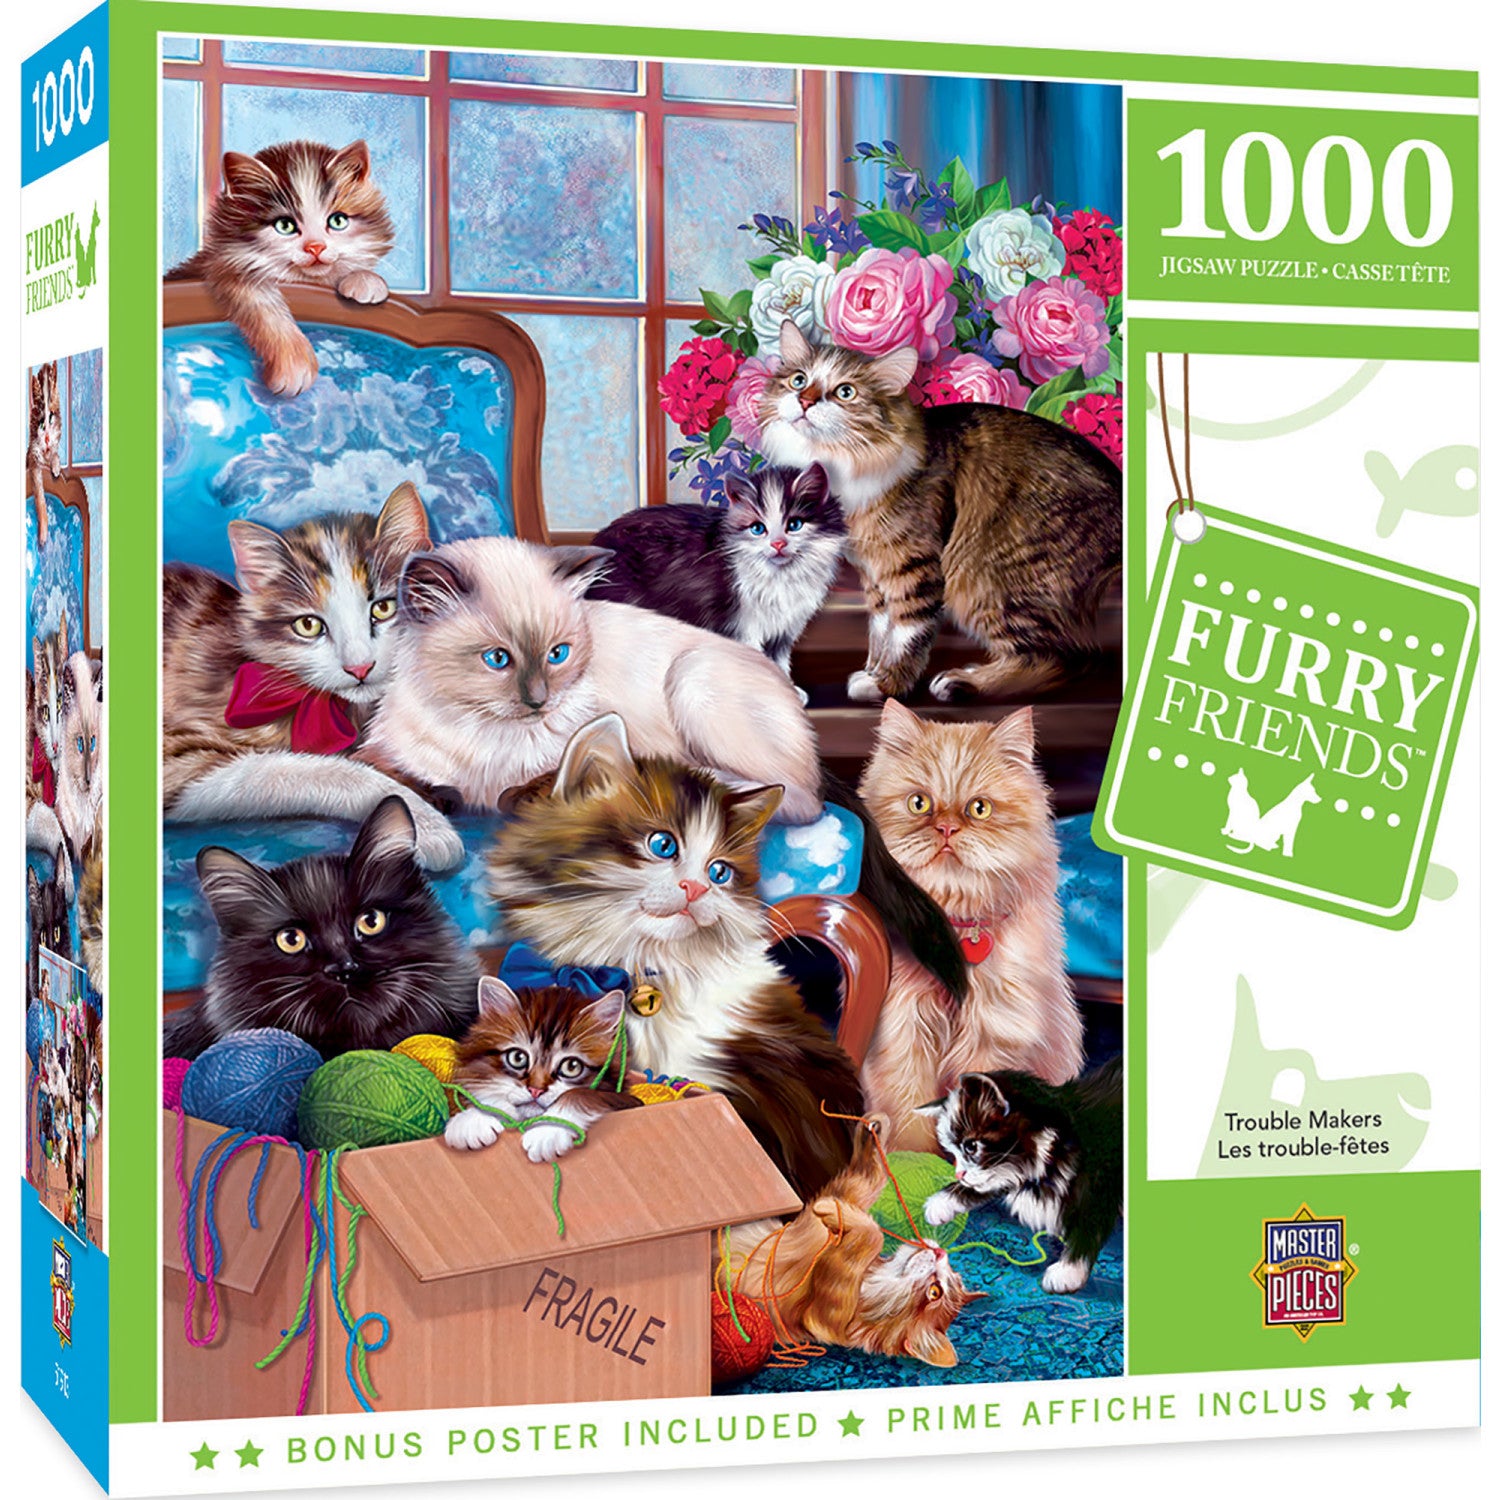 Furry Friends - Trouble Makers 1000 Piece Jigsaw Puzzle